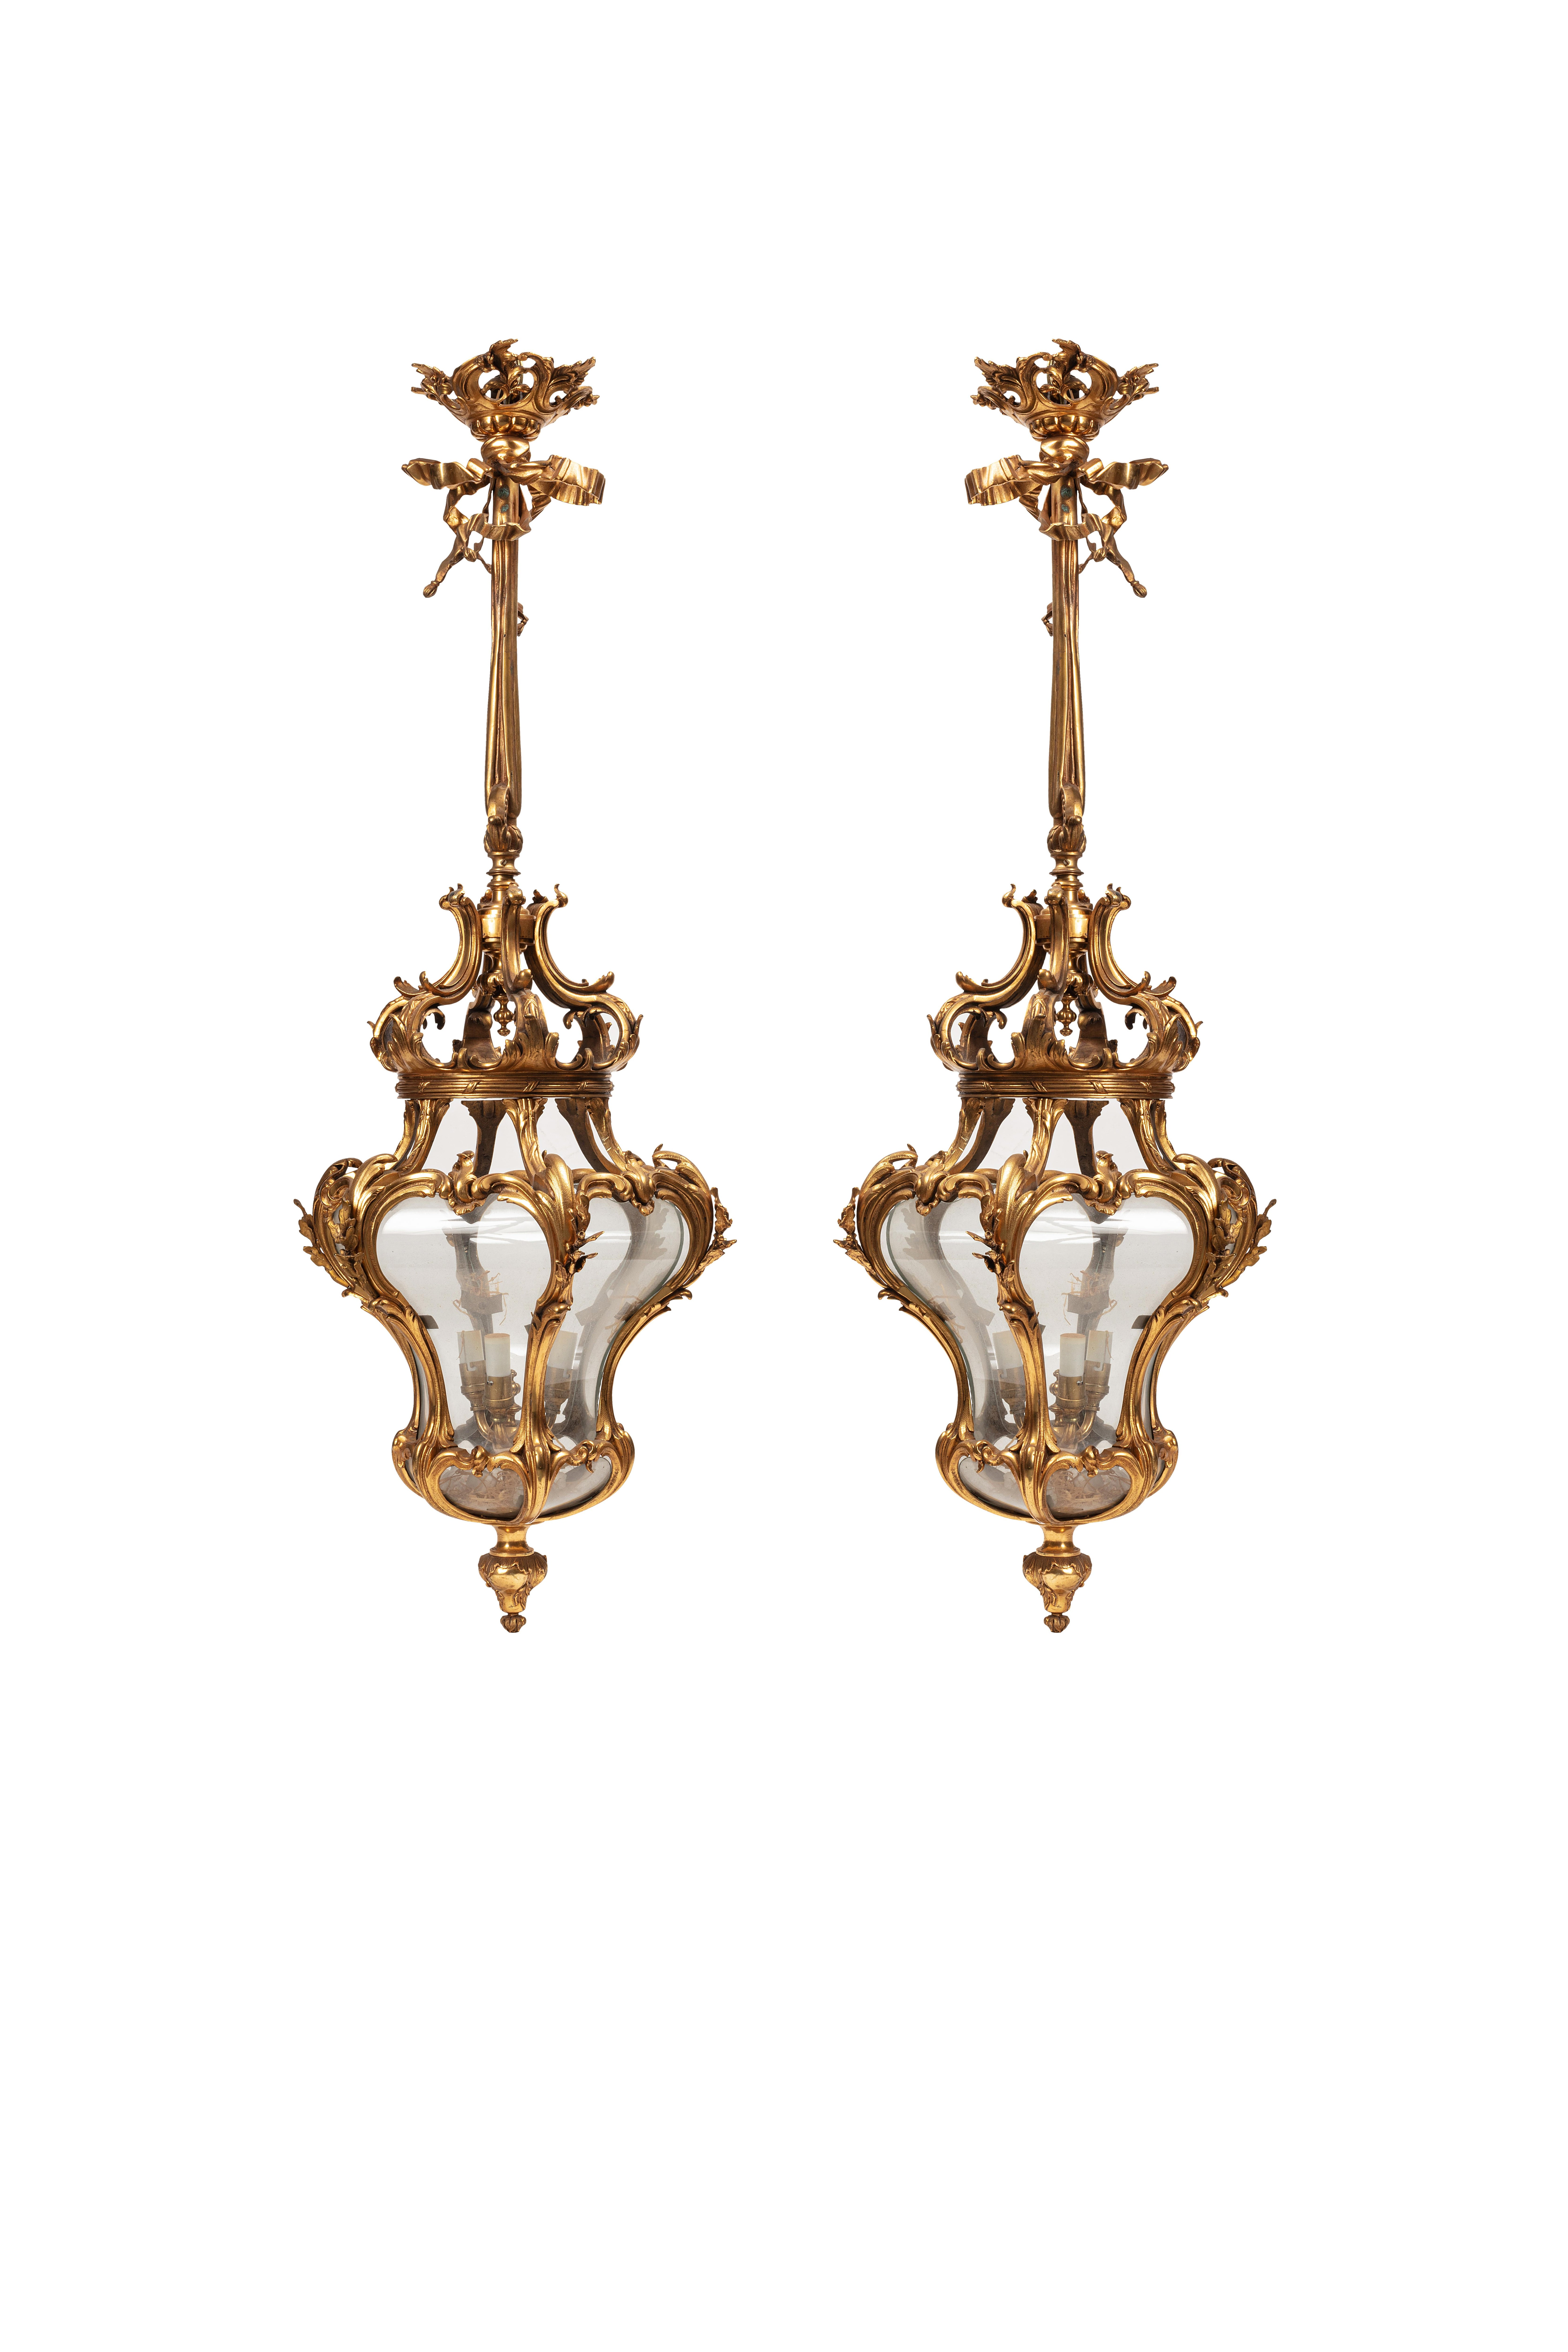 Very beautiful pair of lanterns gilded bronze louis XV style ,by their shape they are rare ,elegant and sober at the same time they can radiate a room